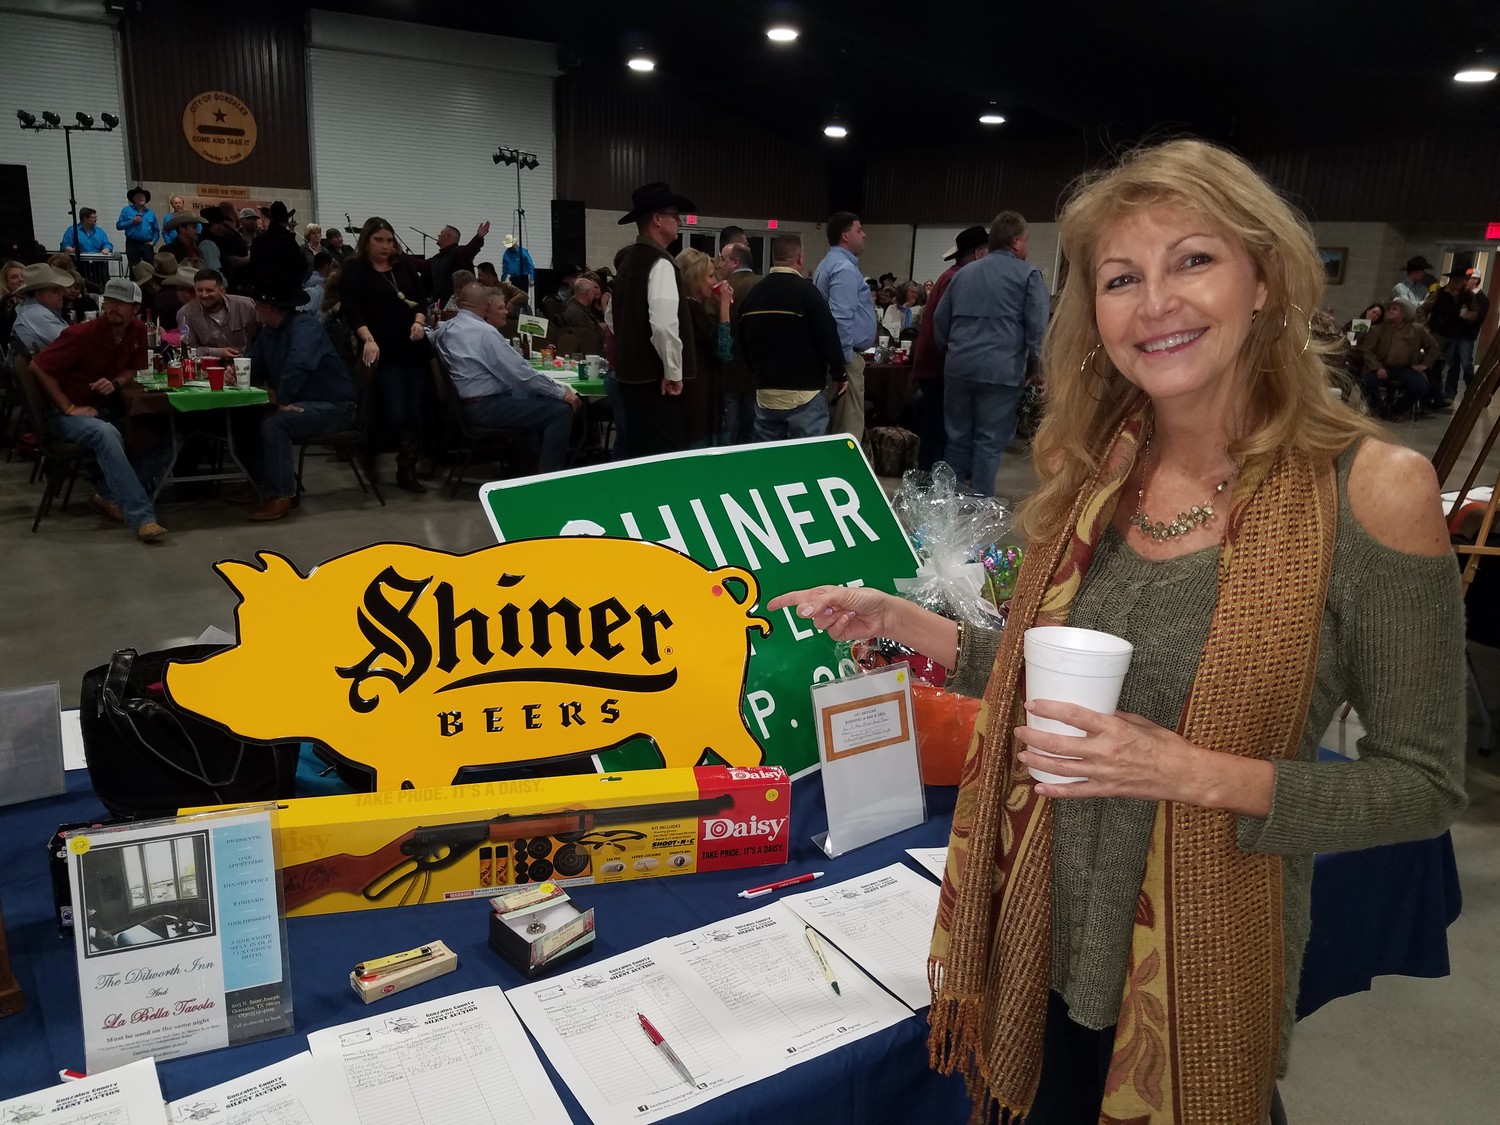 Donna Mayeaux had fun at the Go Texan fundraiser, as she set her eyes on the Shiner pig ornament.